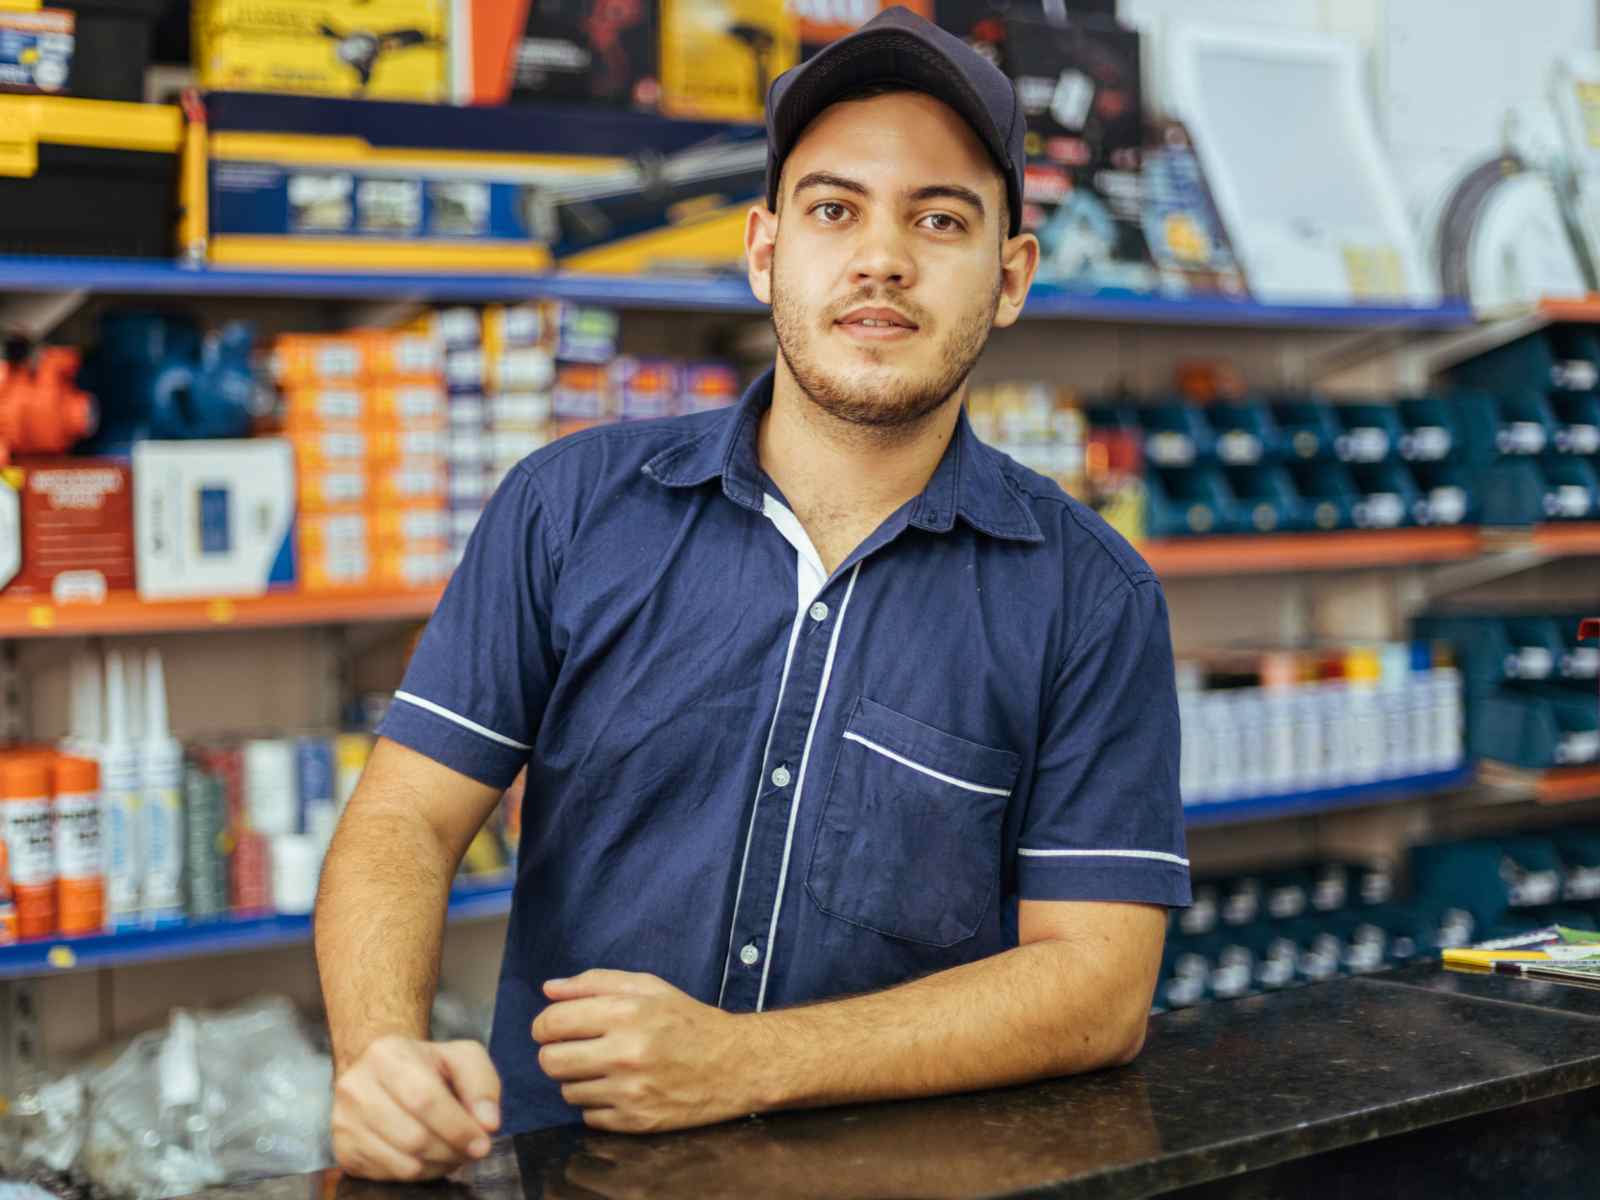  A salesperson wearing a blue shirt and black cap is leaning on a counter in a hardware store.